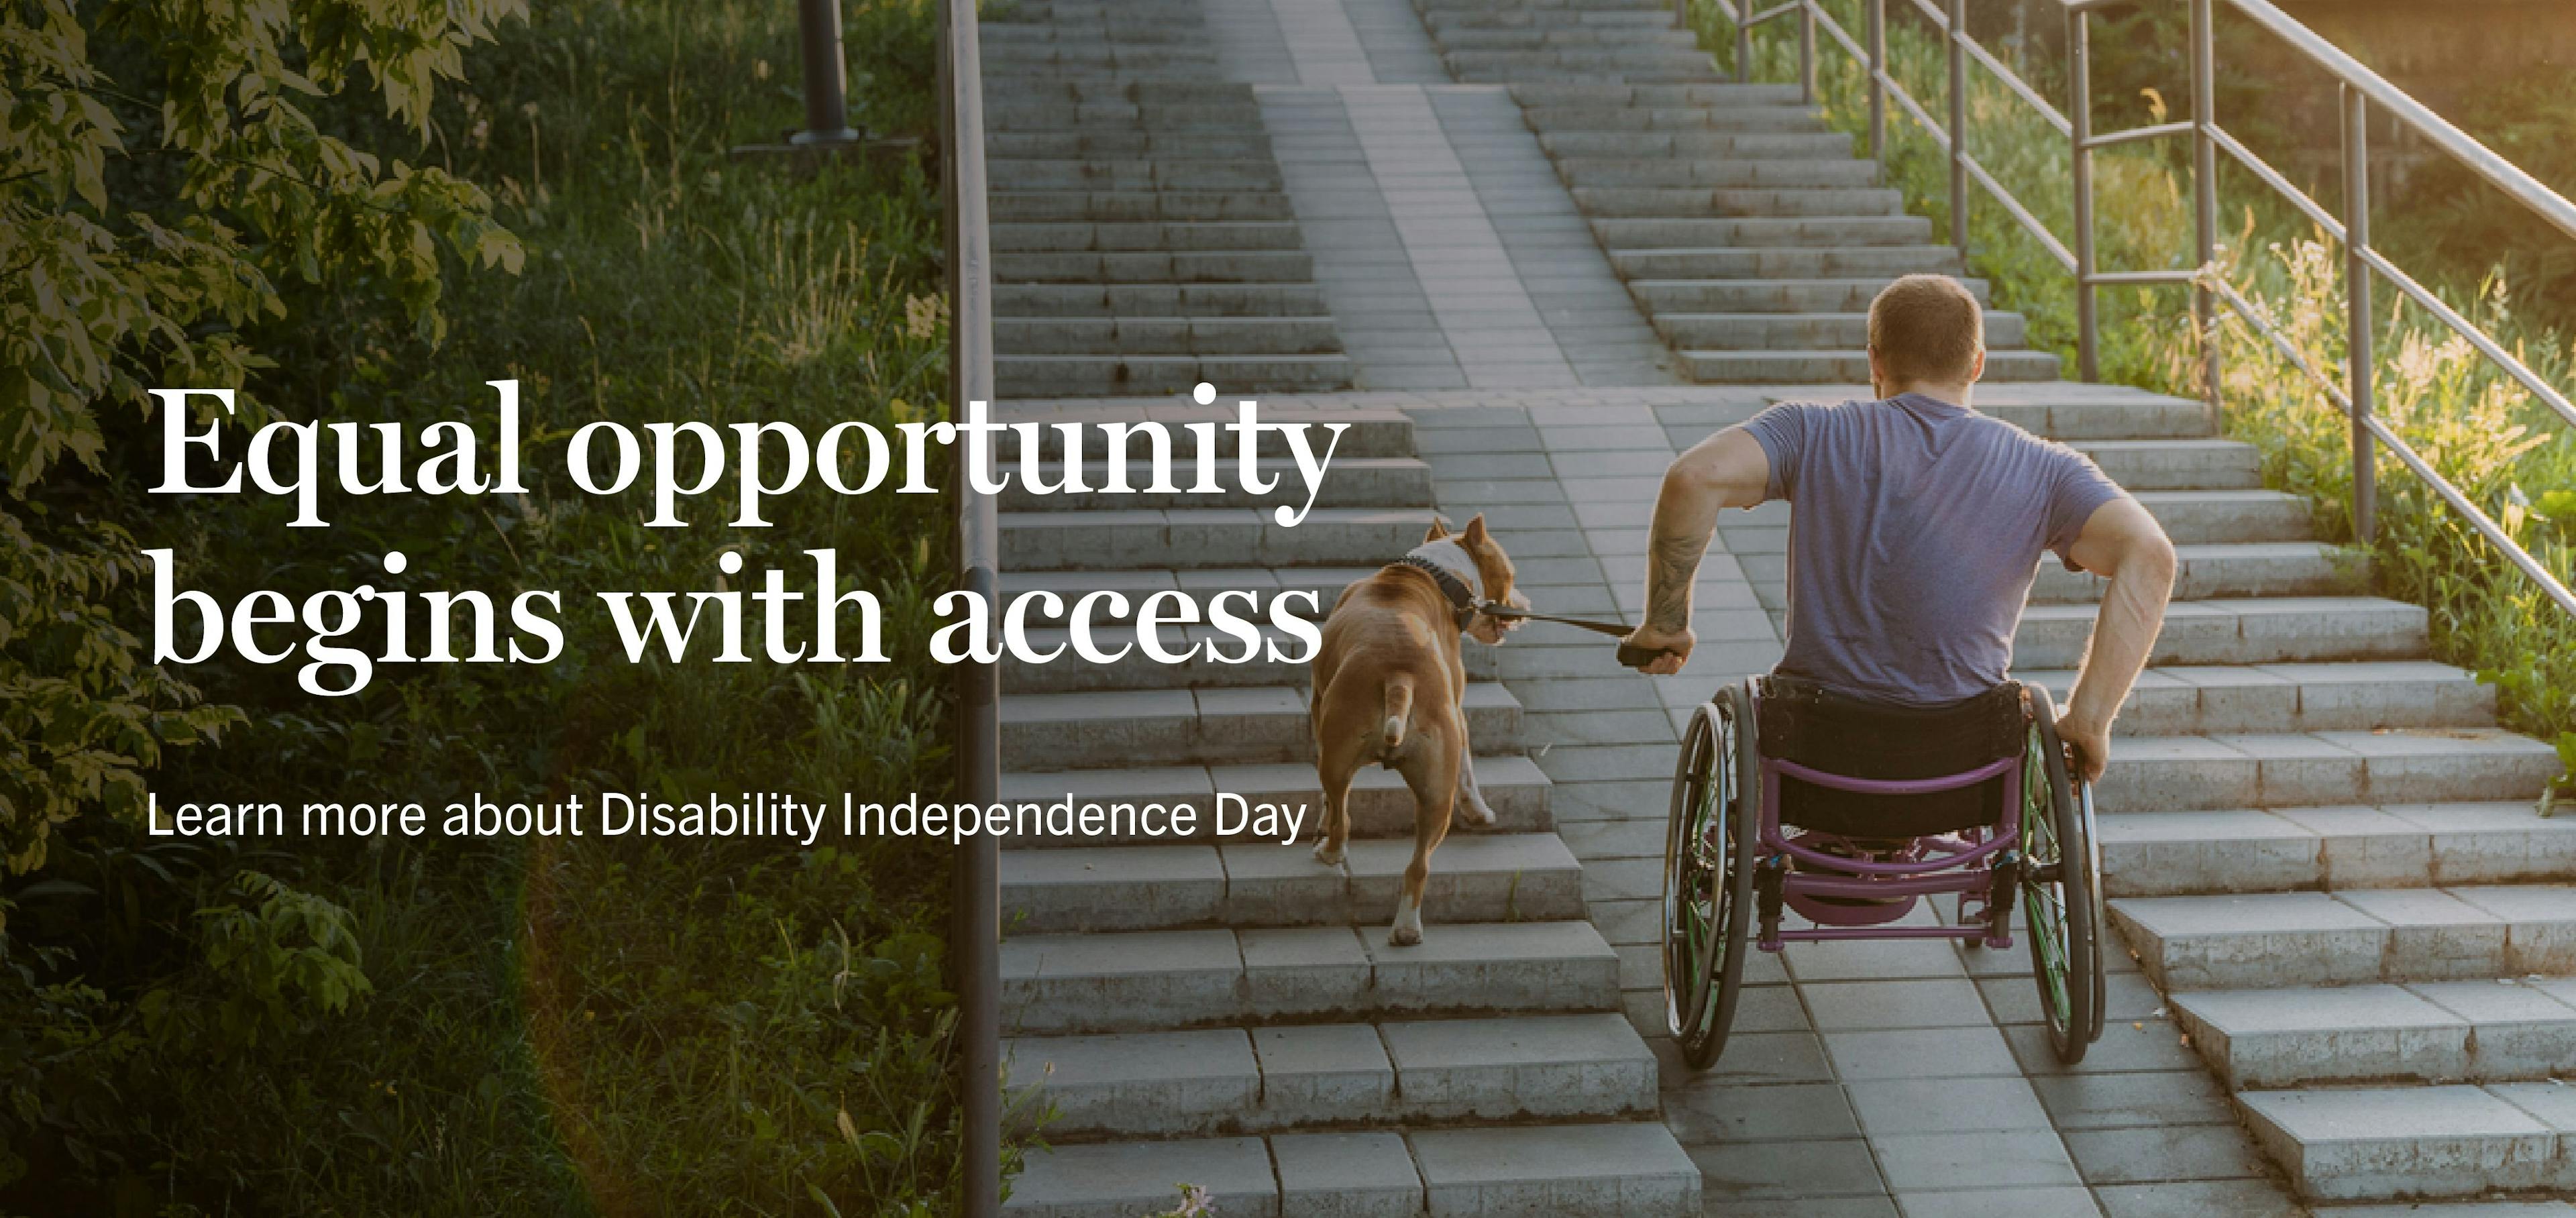 Celebrating and Reflecting on National Disability Independence Day